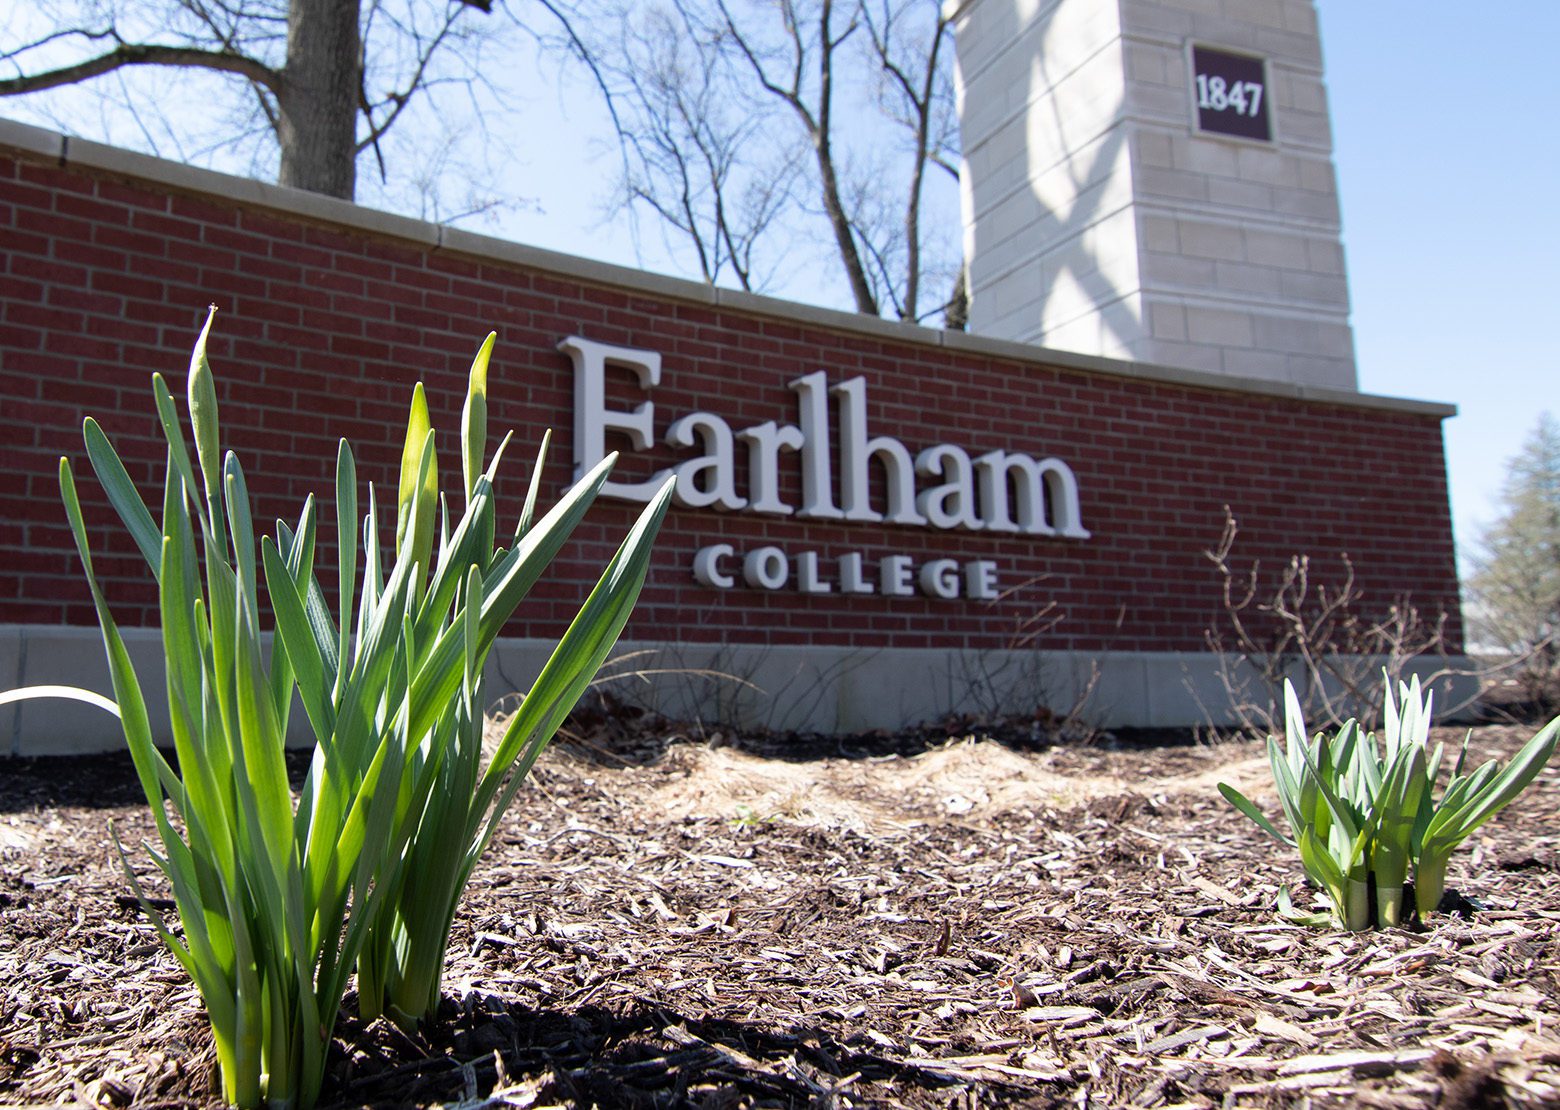 Earlham College offers new interactive driving tour of campus